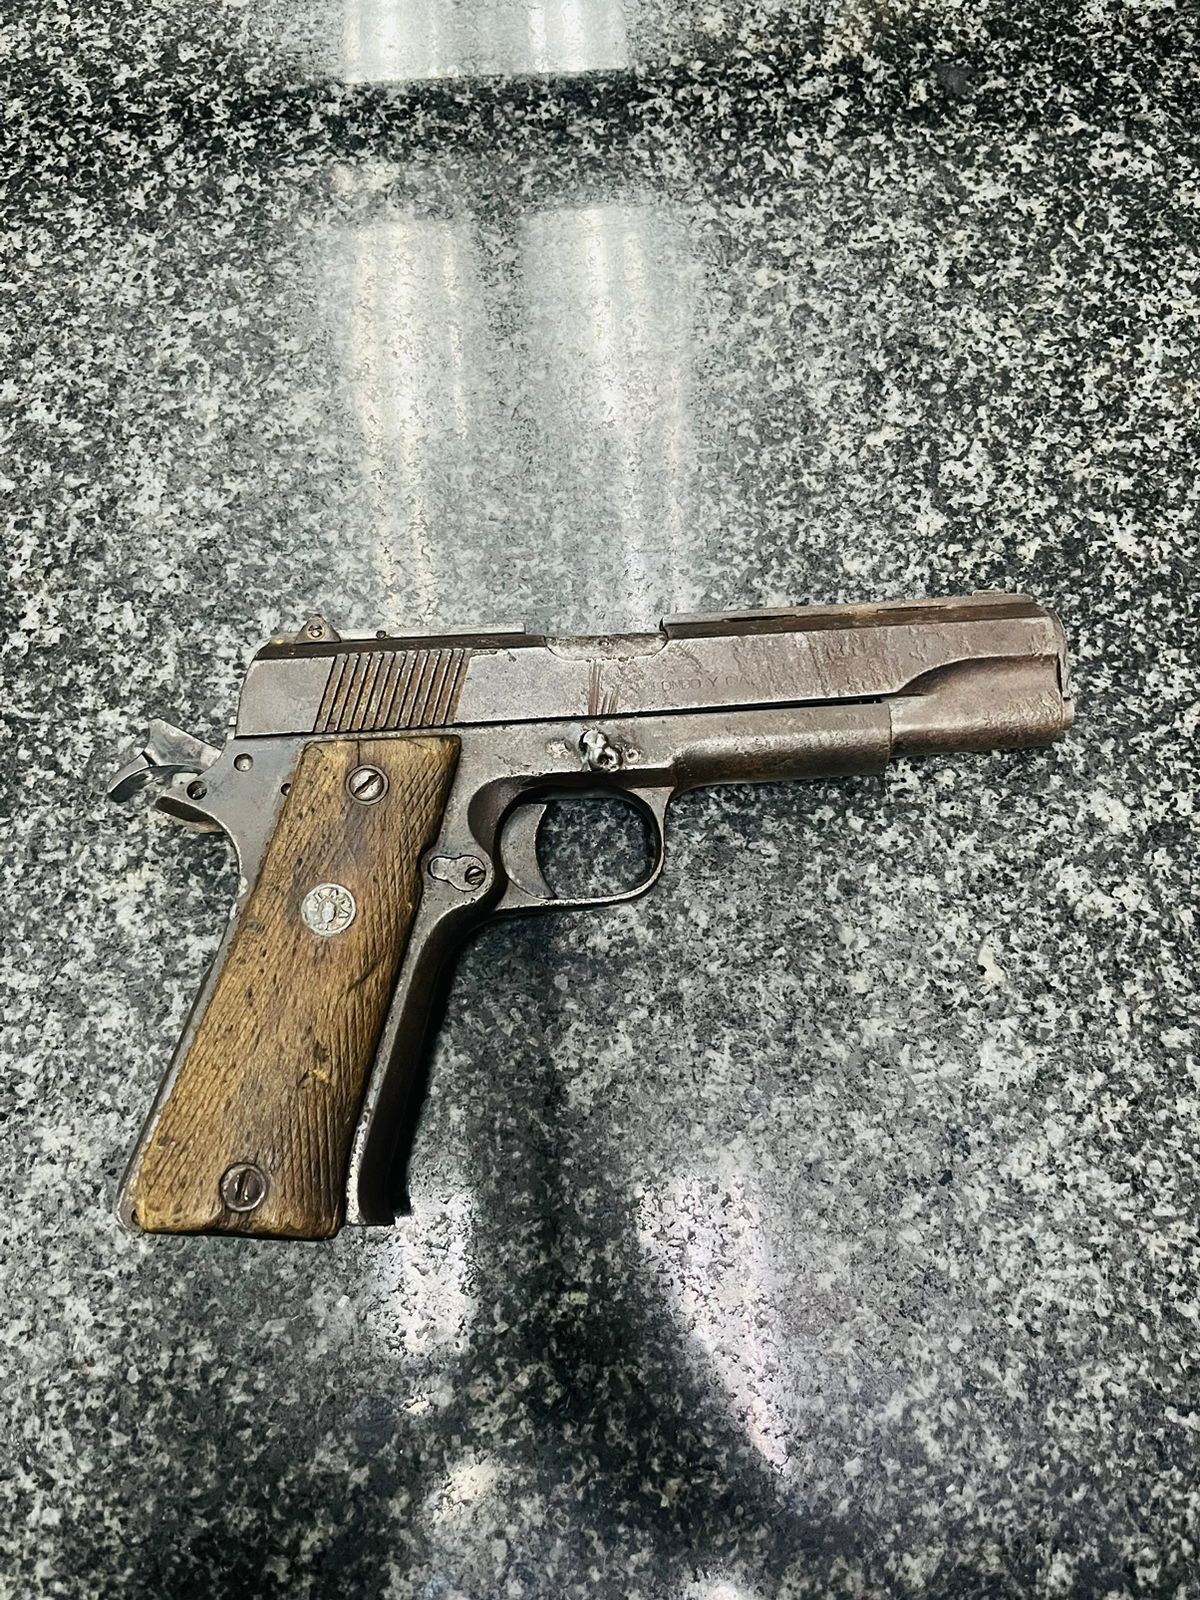 Three suspects due to appear in court on charges of possession of prohibited firearms and ammunition